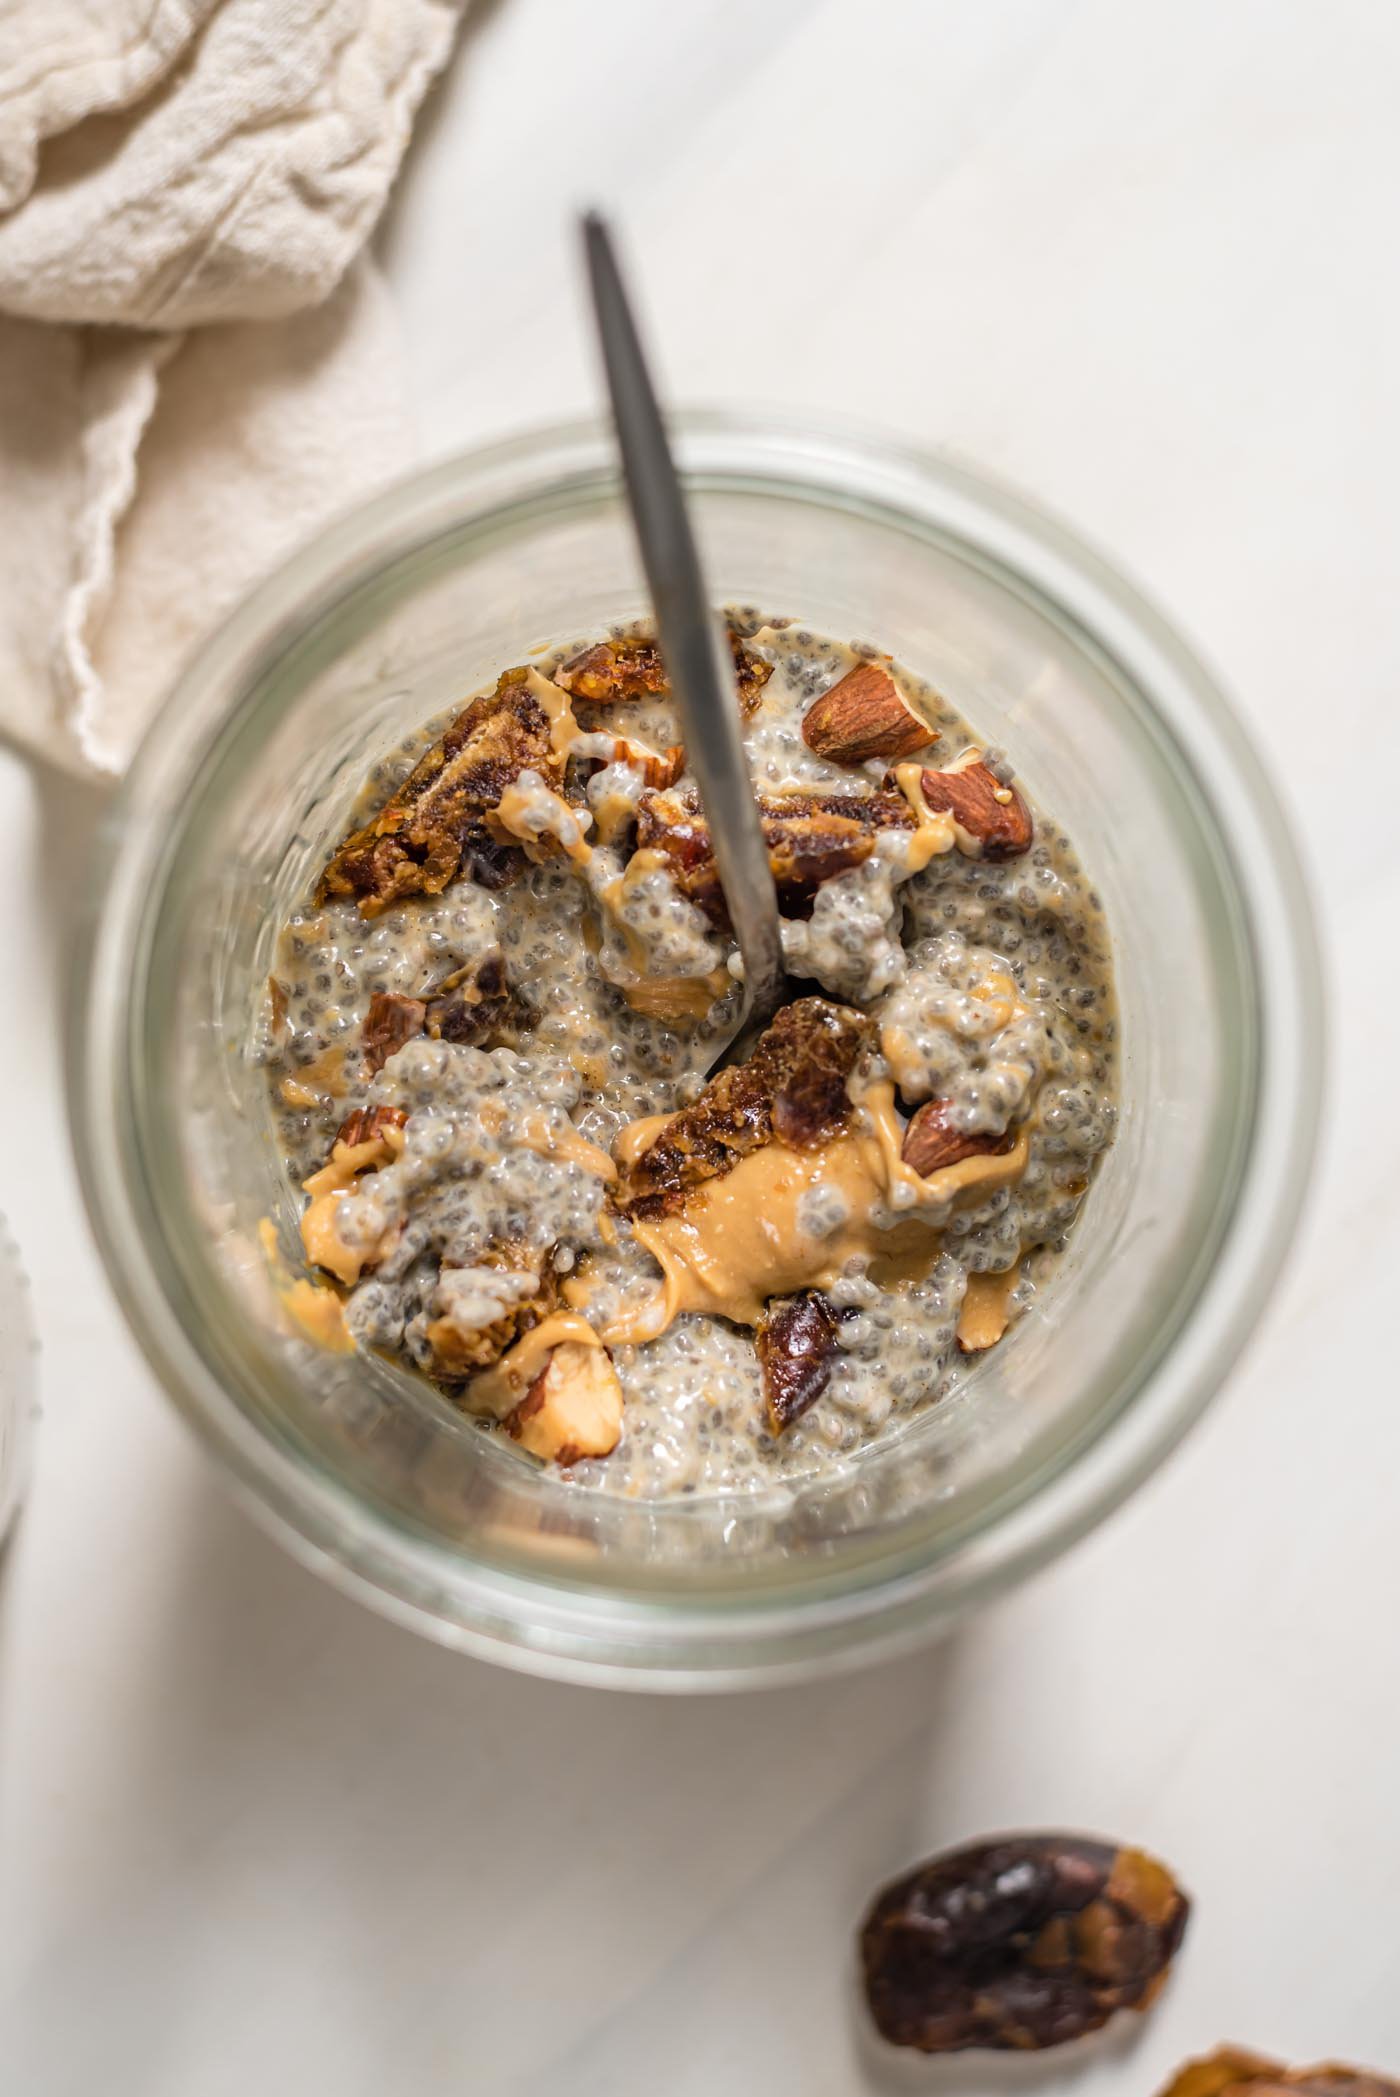 https://runningonrealfood.com/wp-content/uploads/2021/02/Vegaan-Sweet-and-Salty-Peanut-Butter-Chia-Seed-Pudding-Recipe-20.jpg